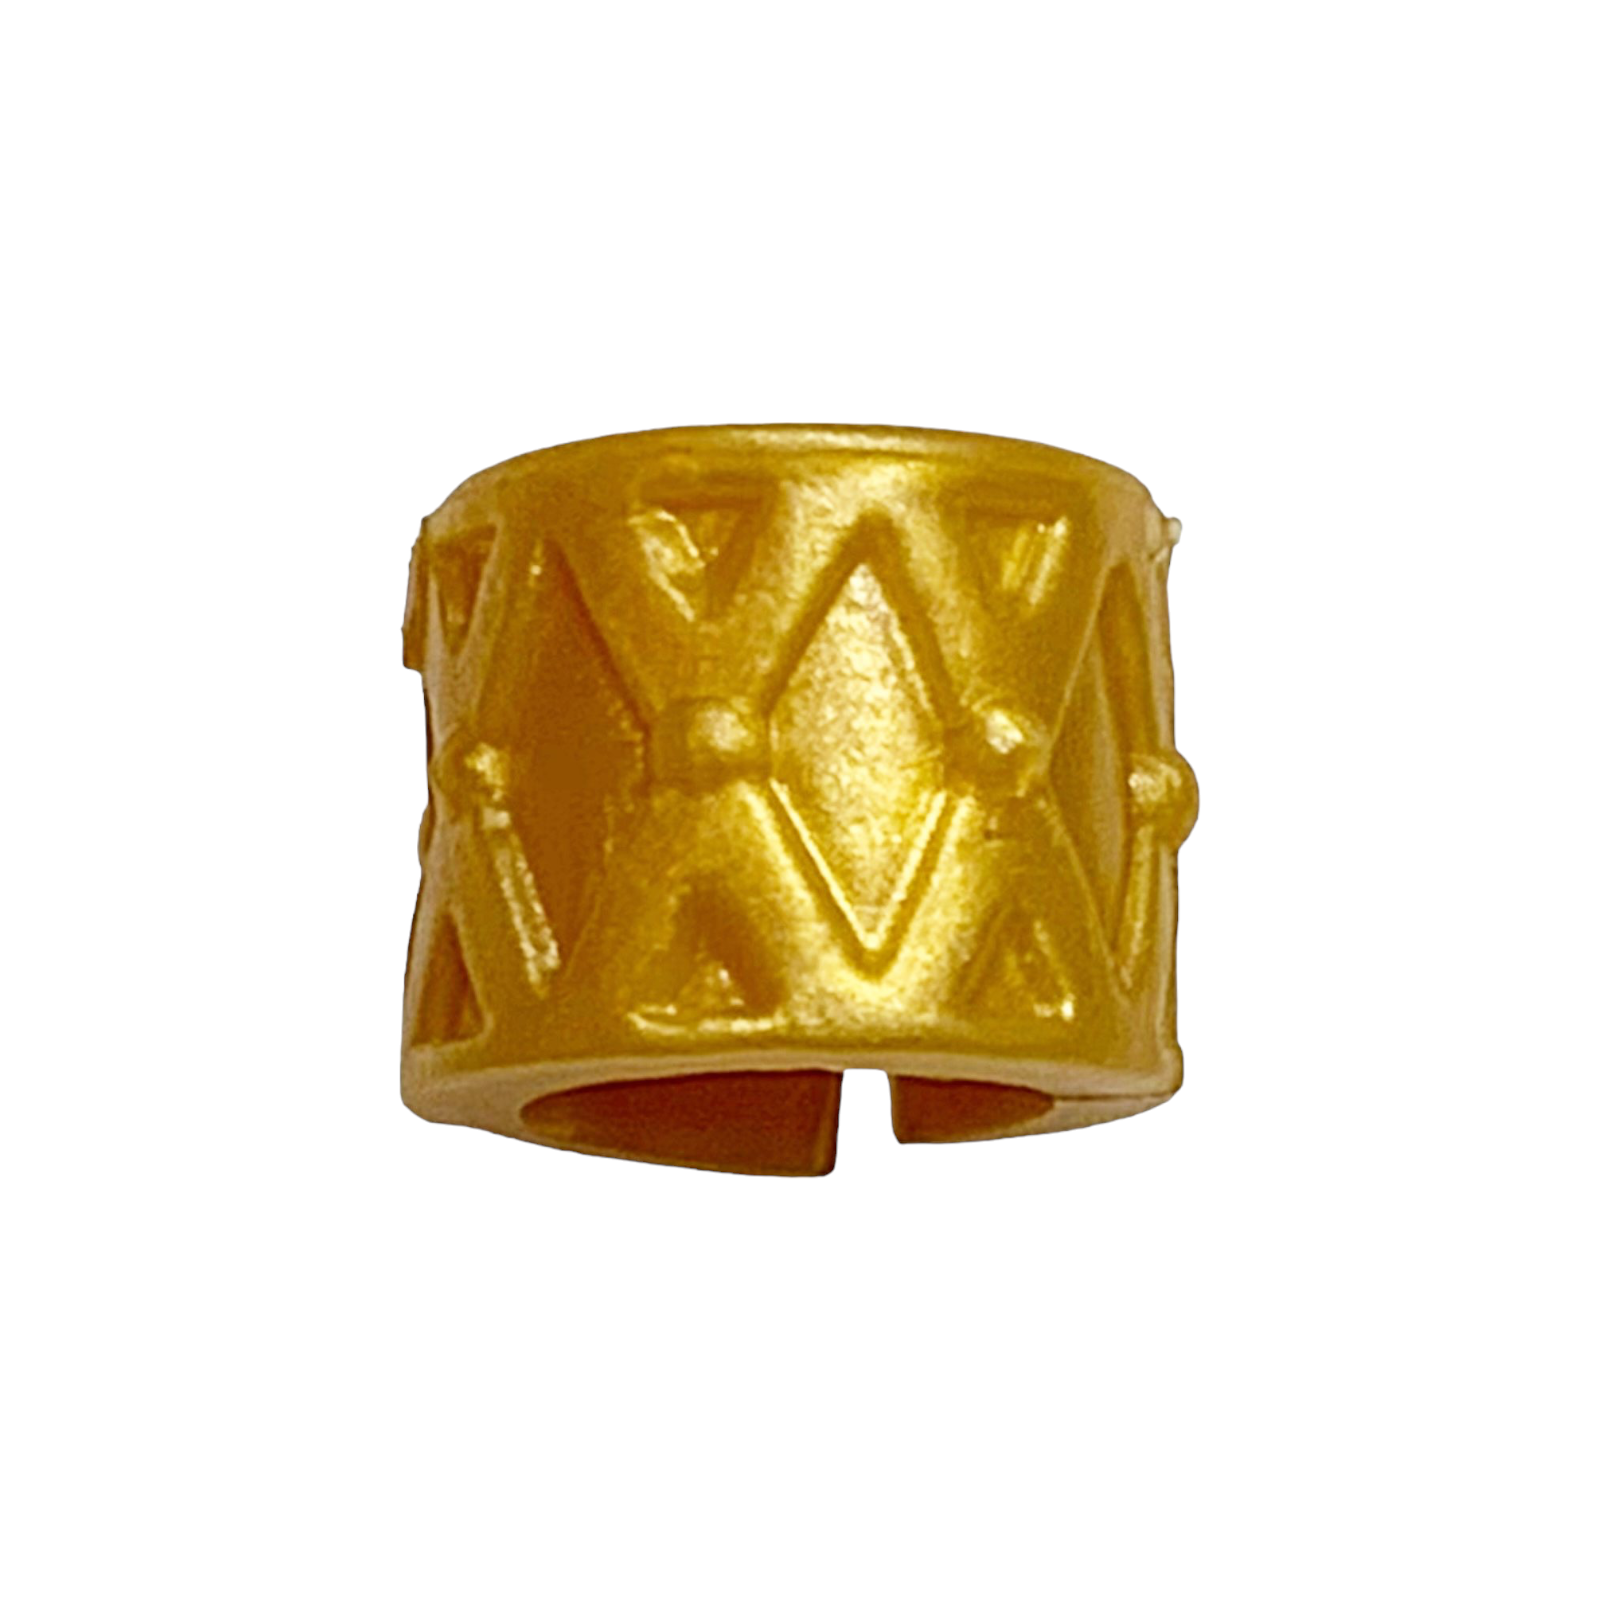 Monster High 1st Wave Original Style Cleo De Nile Doll Replacement Gold Upper Arm Cuff Bracelet